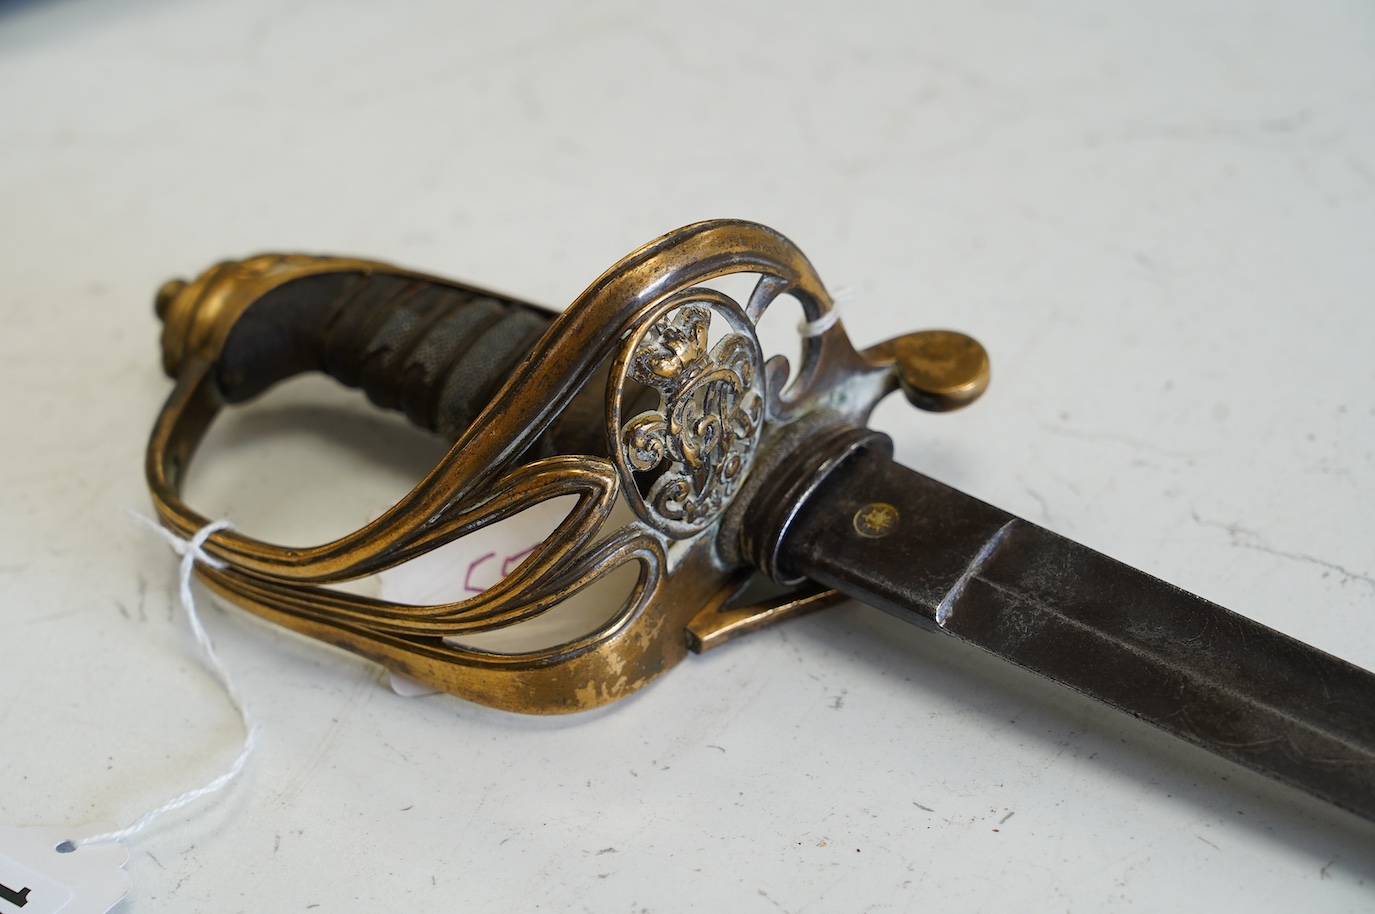 An 1845 infantry officer’s sword, with engraved, fullered and proofed blade, brass guard and remains of shagreen grip, blade 80.5cm. Condition - fair, well worn